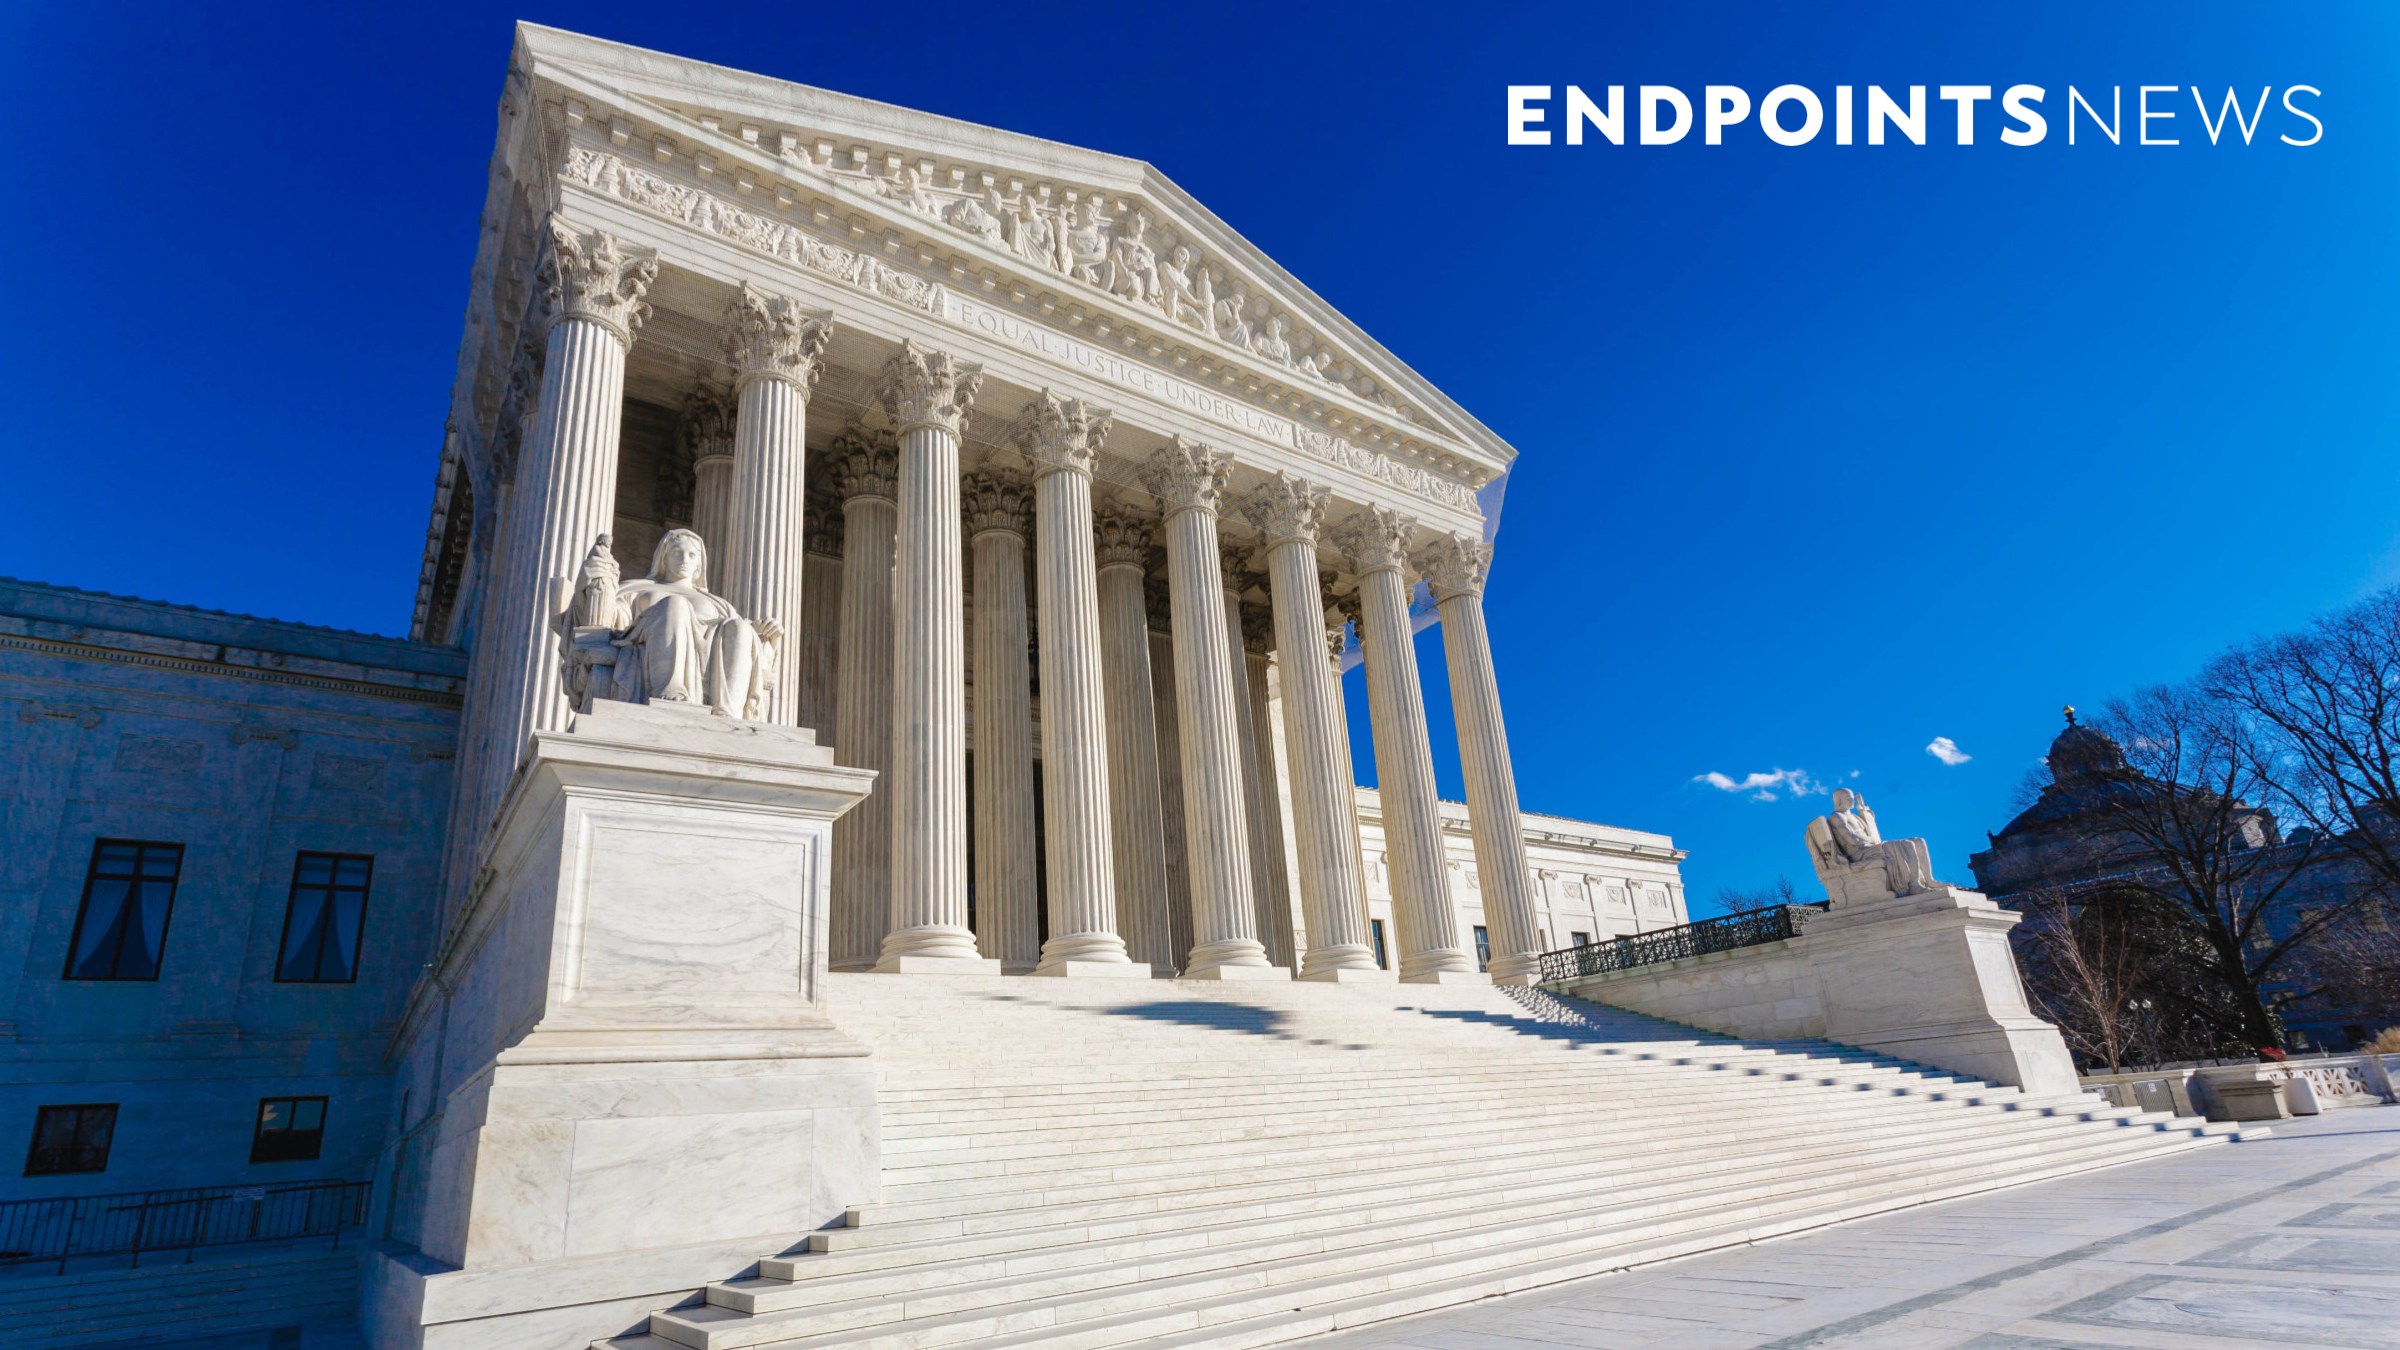 Sanofi responds to patent spat with Amgen as Supreme Court arguments set for March